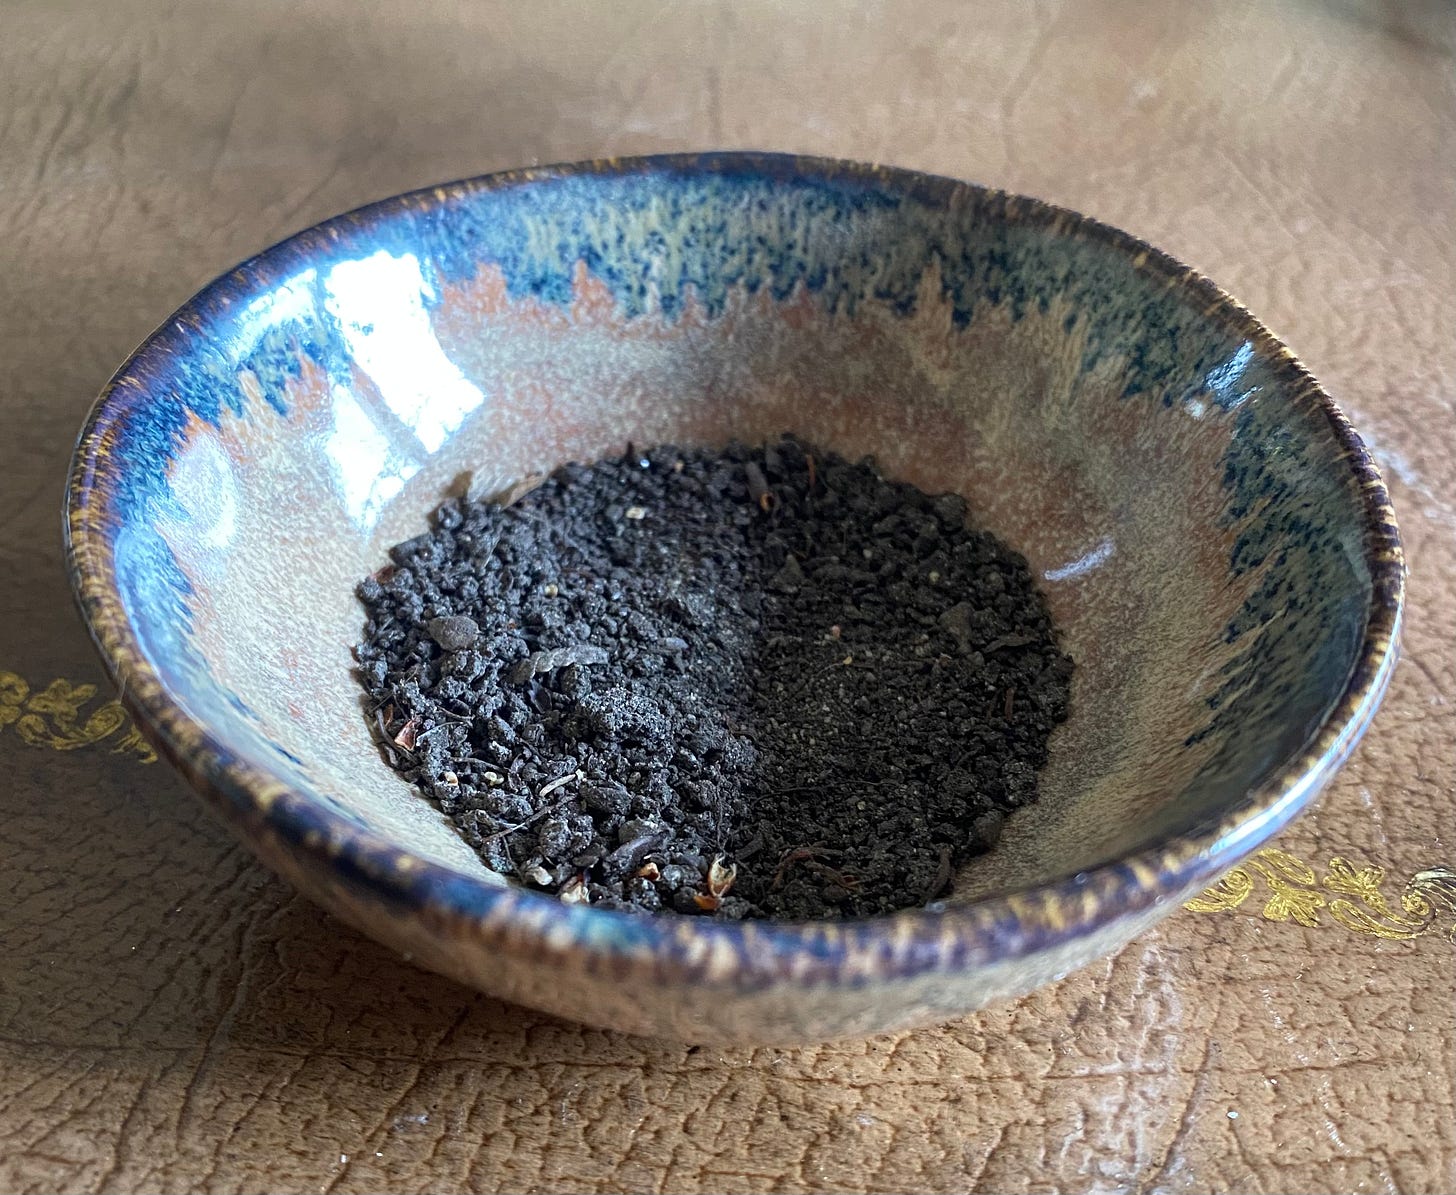 rustic pottery dish glazed with blue and brown, small  close up shot of small amount of black soil in the dish, sit-in on a leather desk mat, blurred in the background